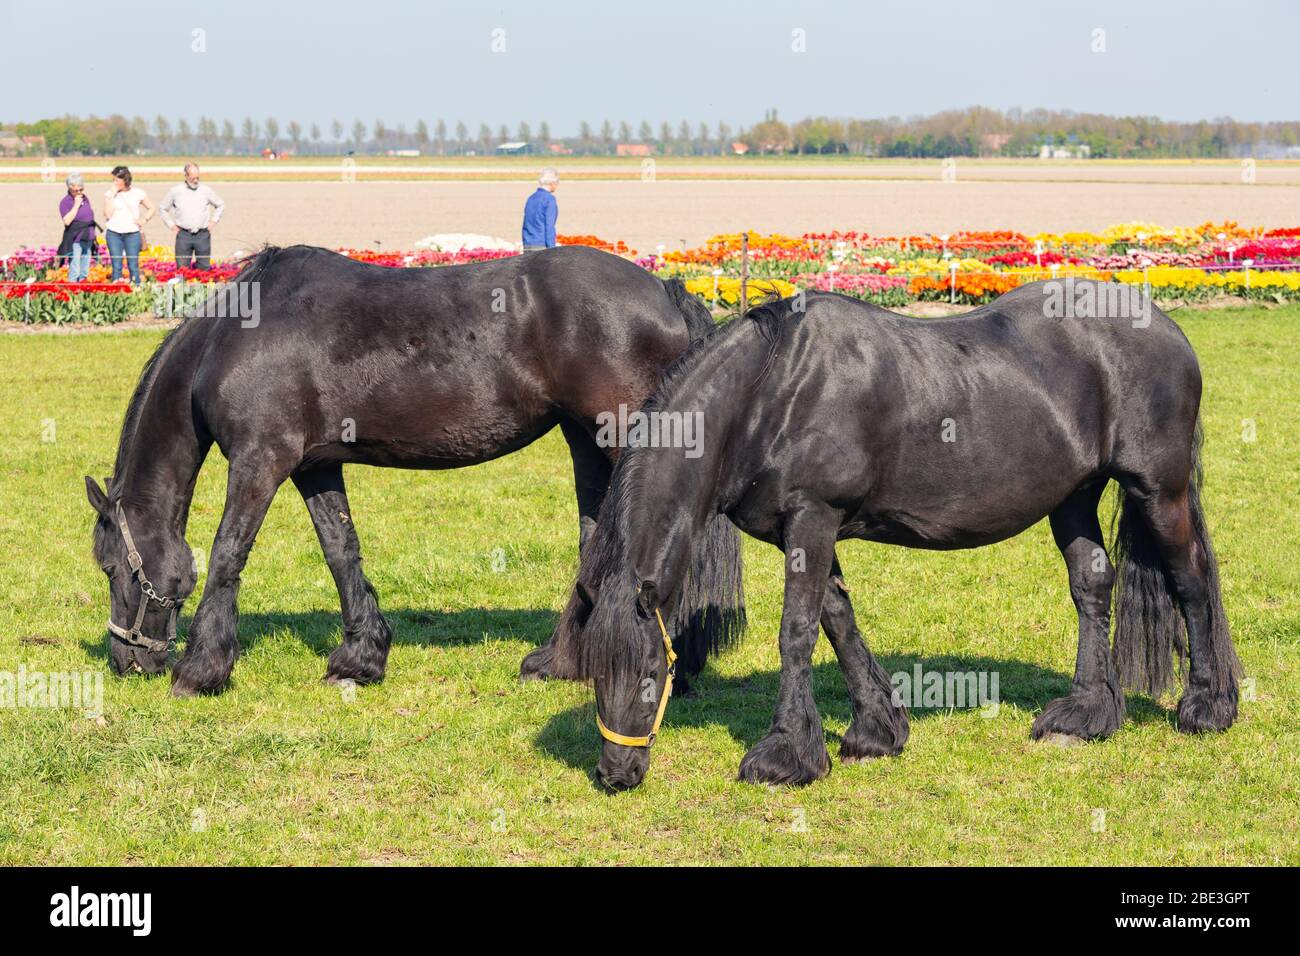 Grazing horses while people visit a colorful dutch tulip garden Stock Photo